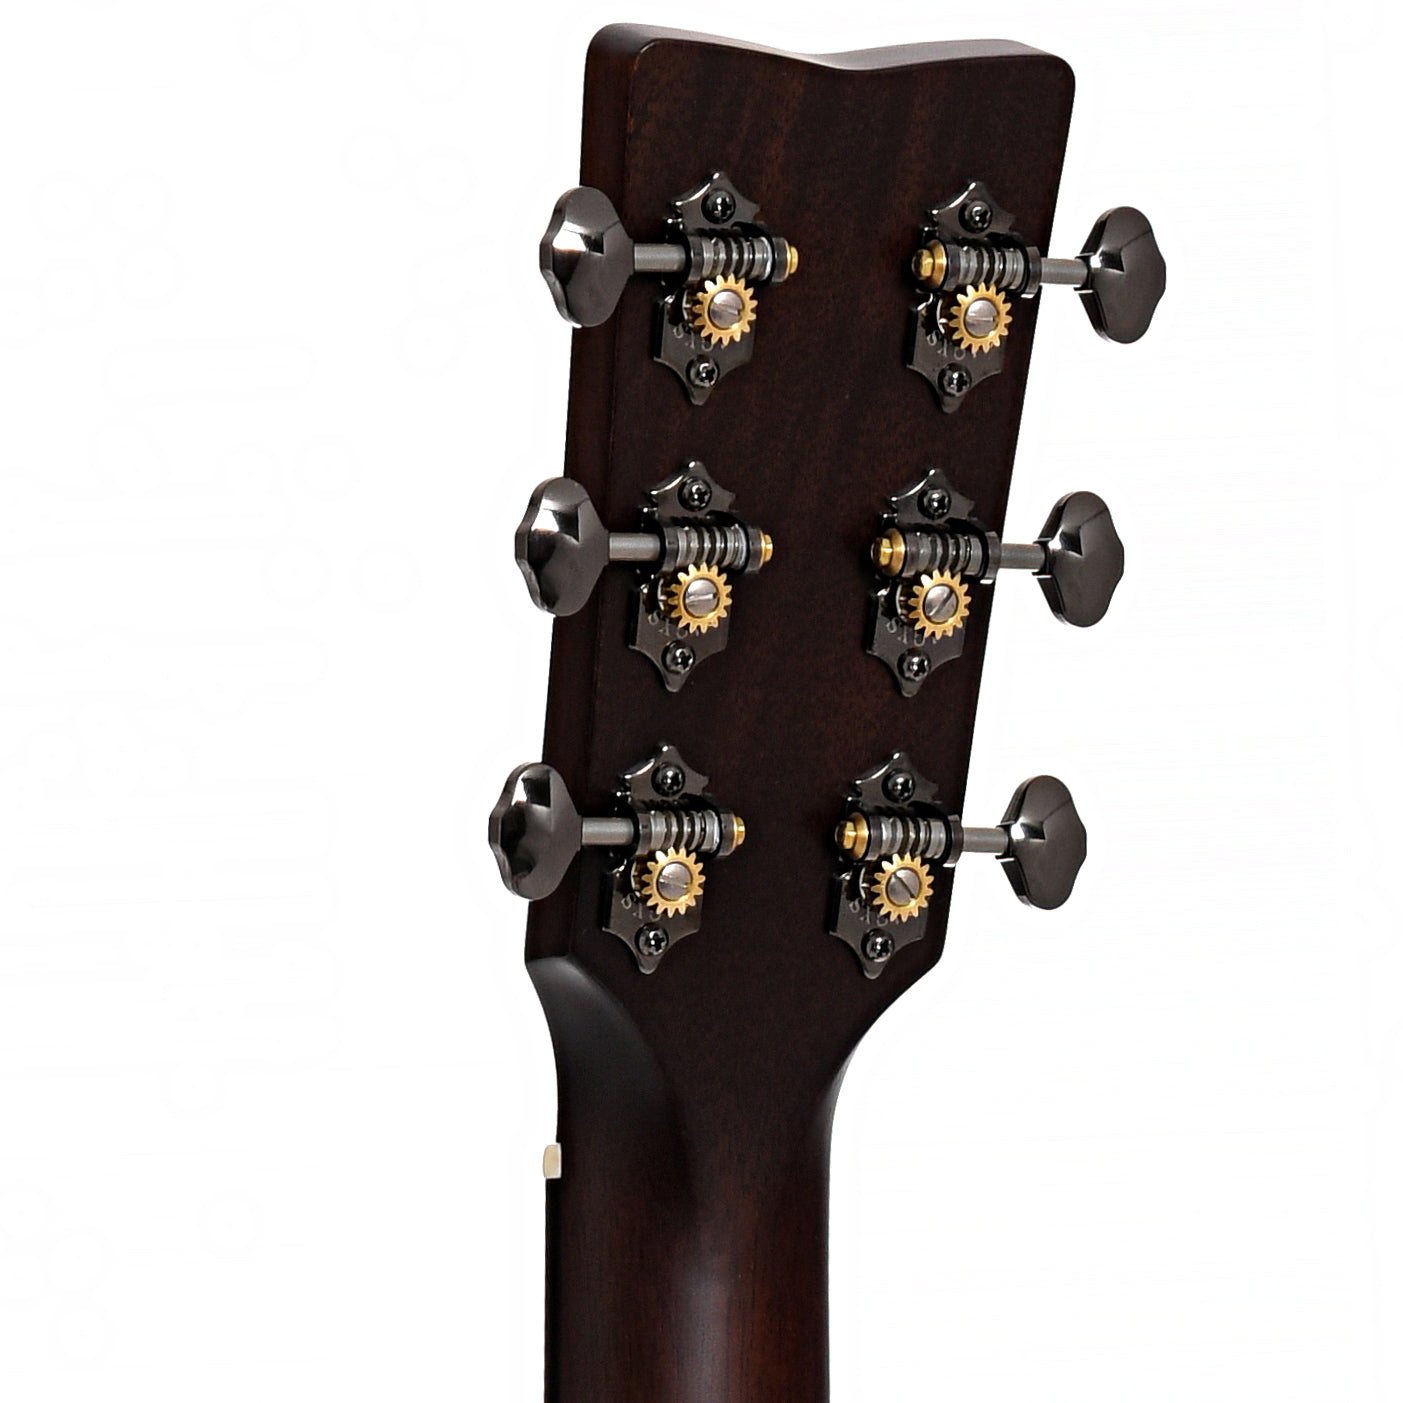 Back headstock of Yamaha FG9 R Limited Edition